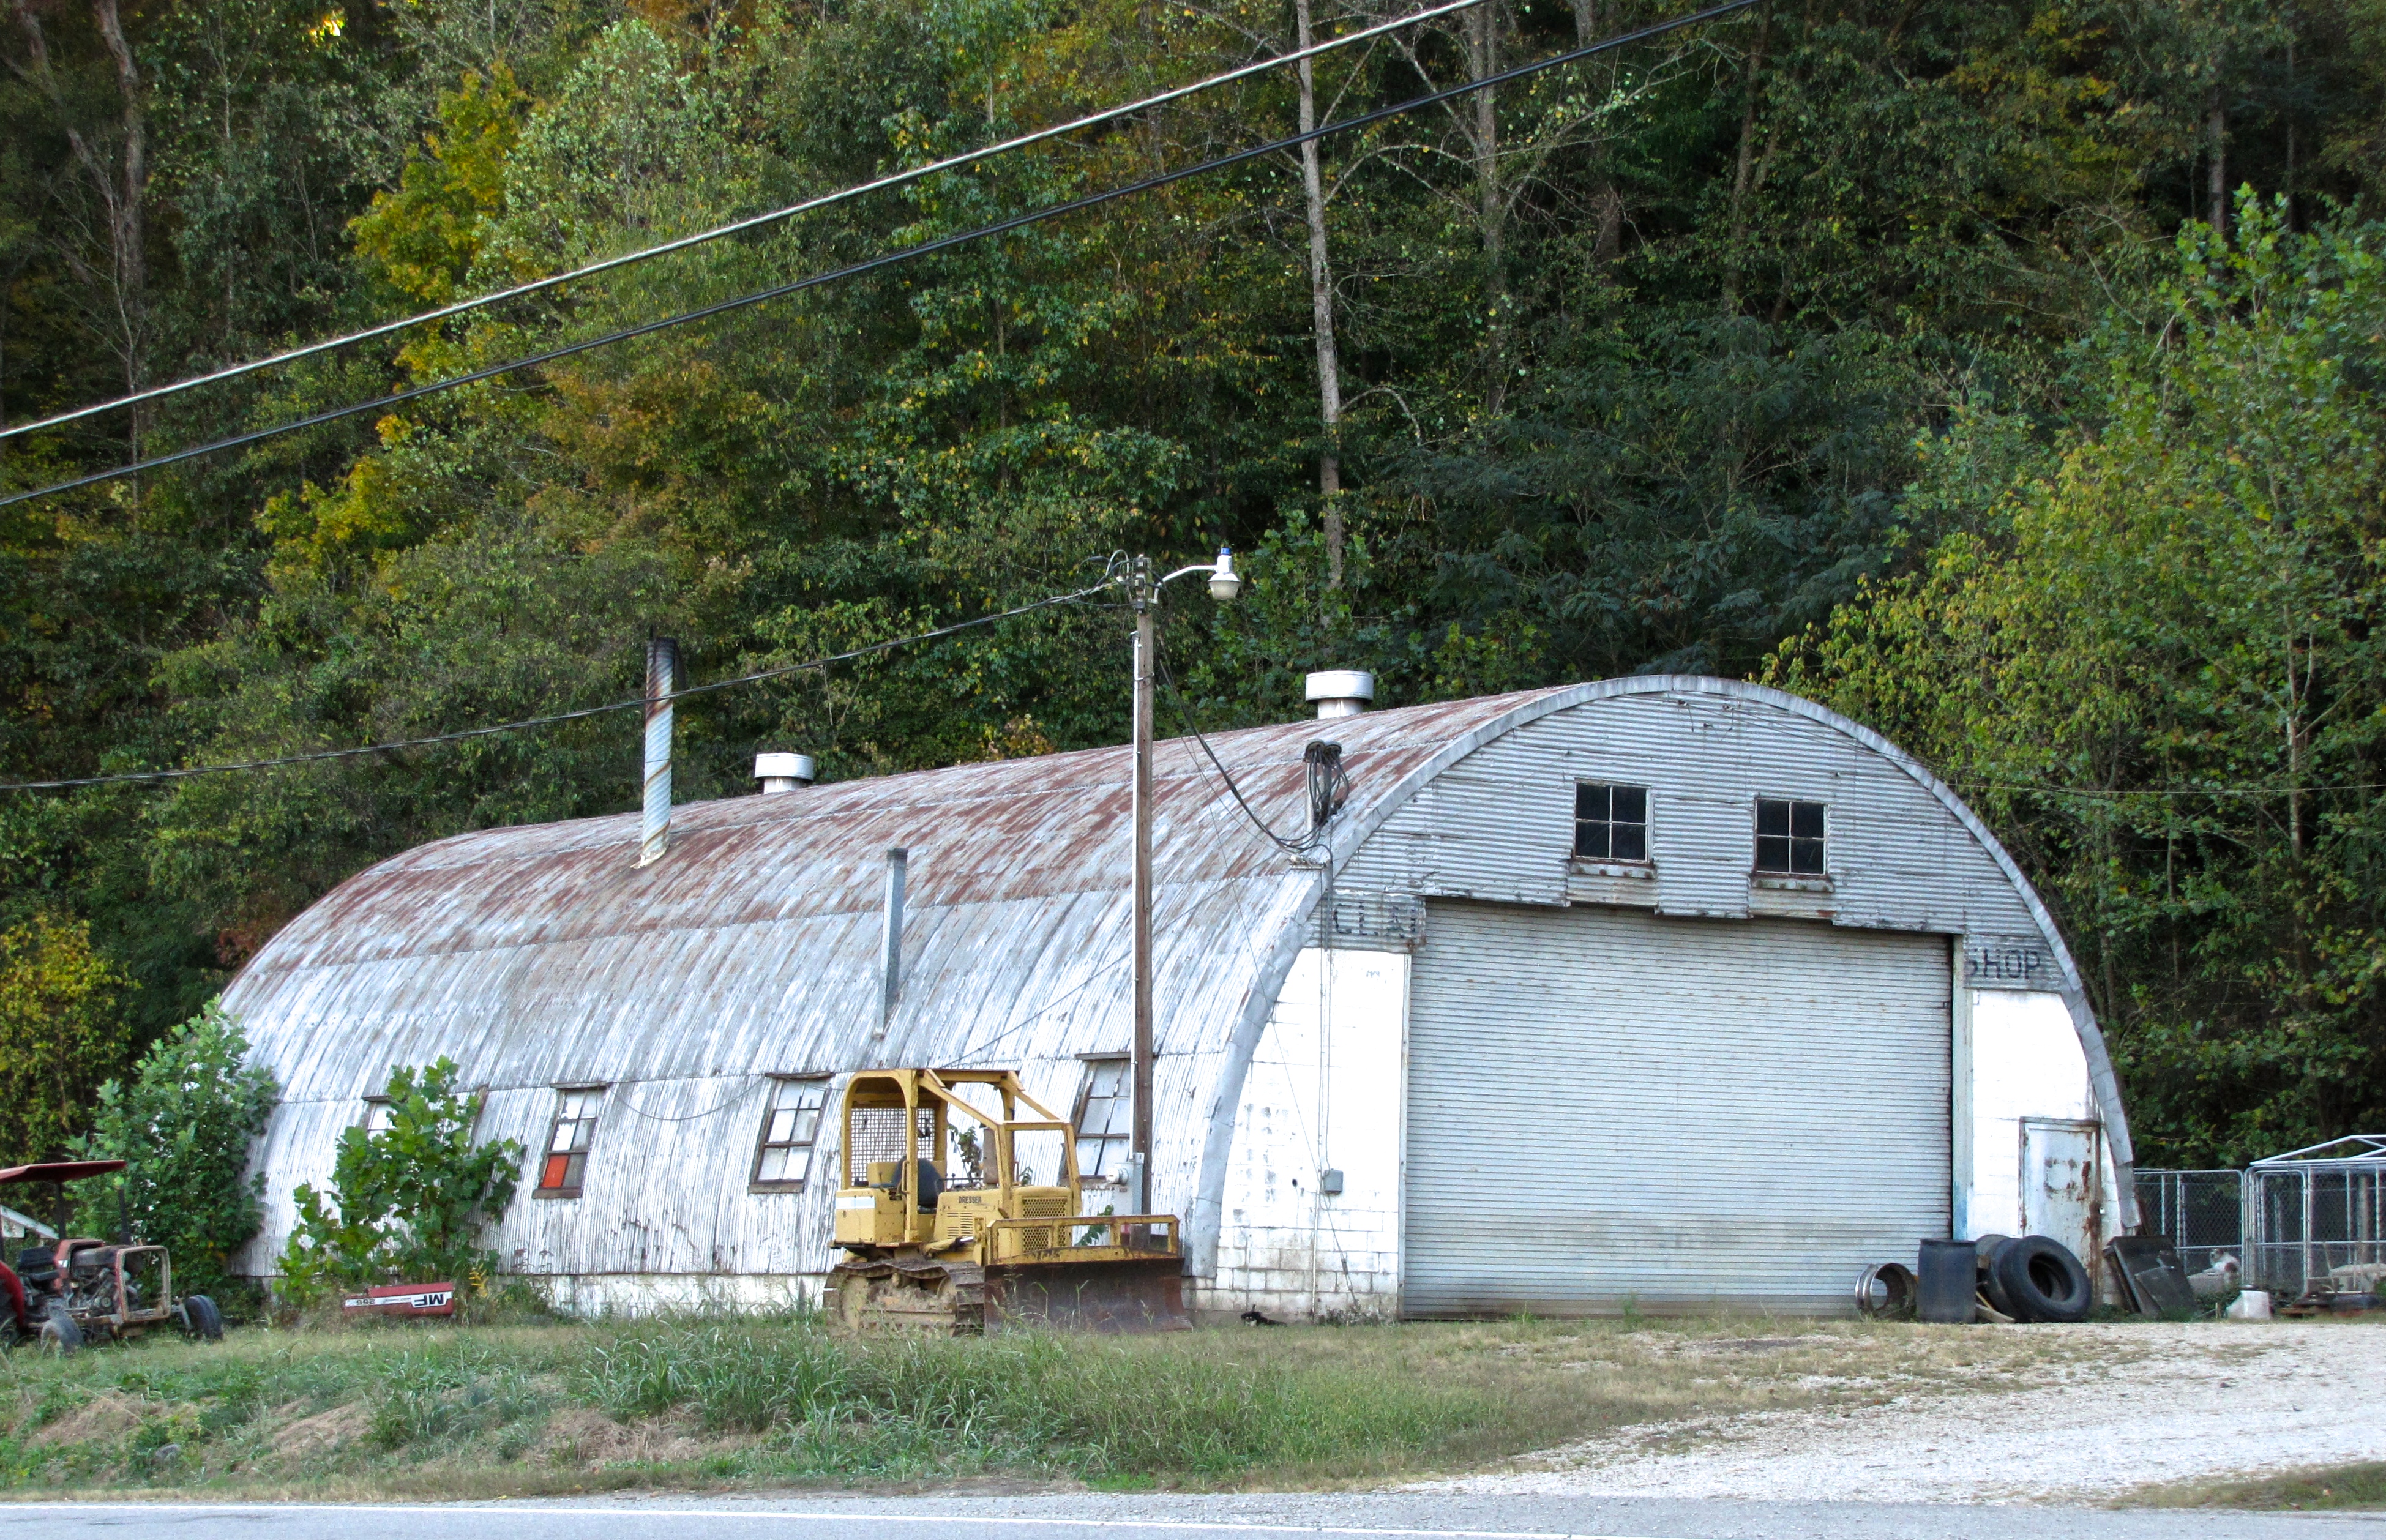 quonset hut in About Us, ME